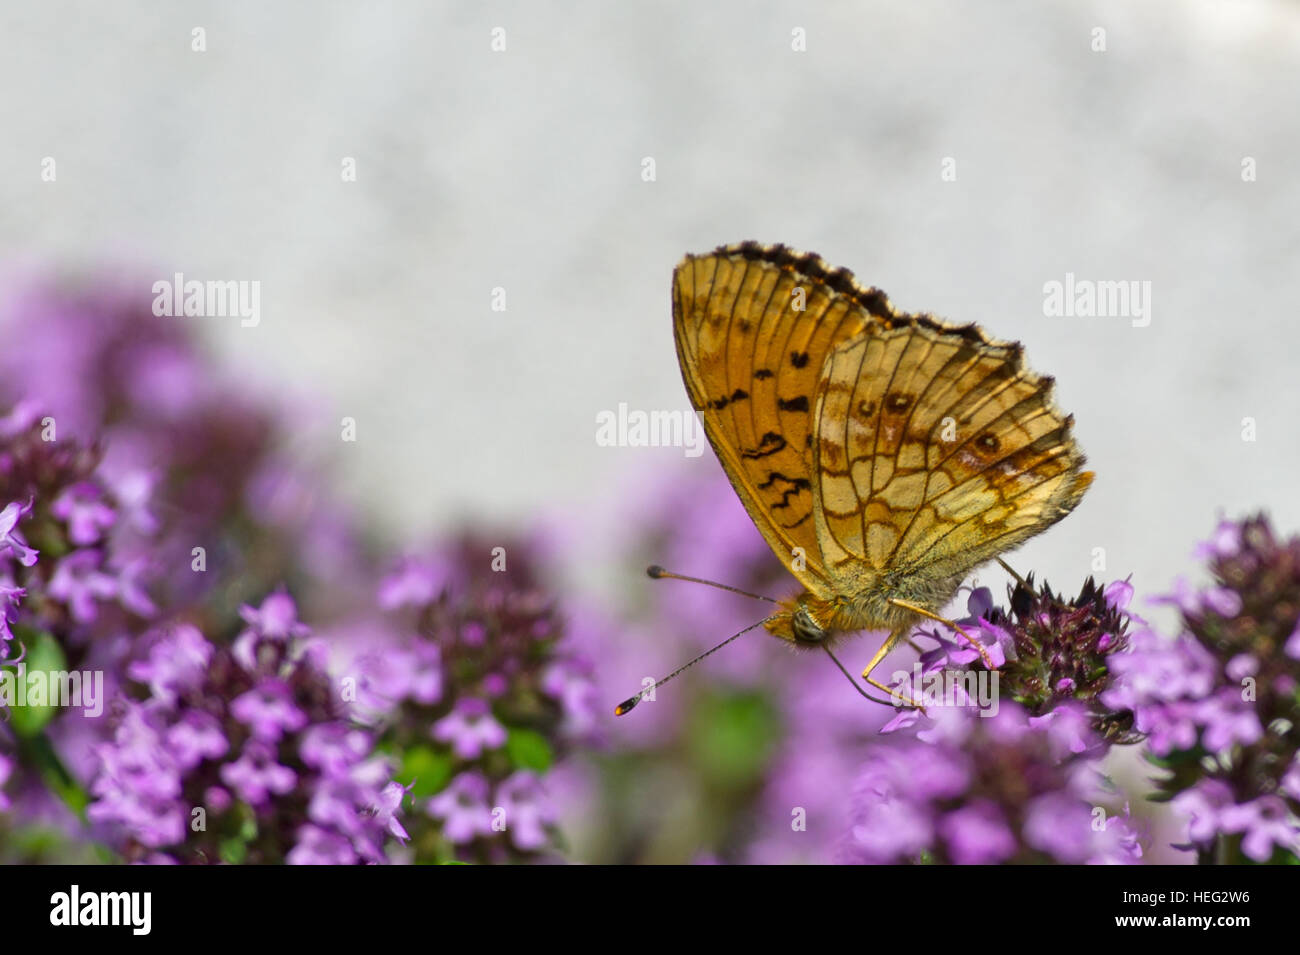 The beautiful Lesser Marbled Fritillary Butterfly (Brenthis ino) on flowering Lemon thyme with a gray defocused background Stock Photo